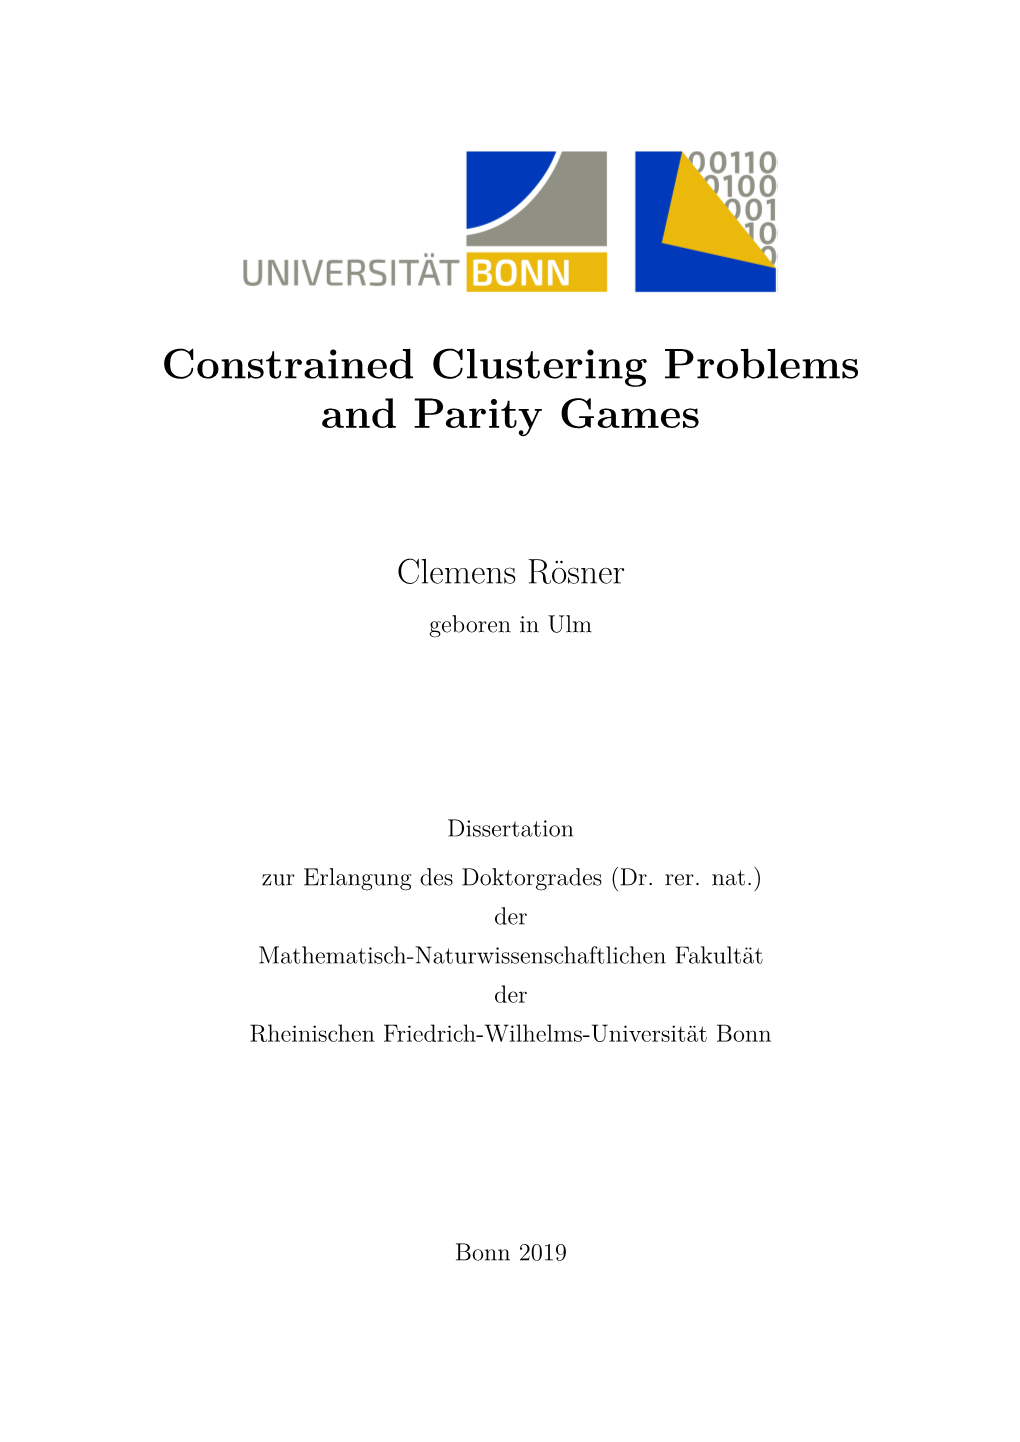 Constraint Clustering and Parity Games